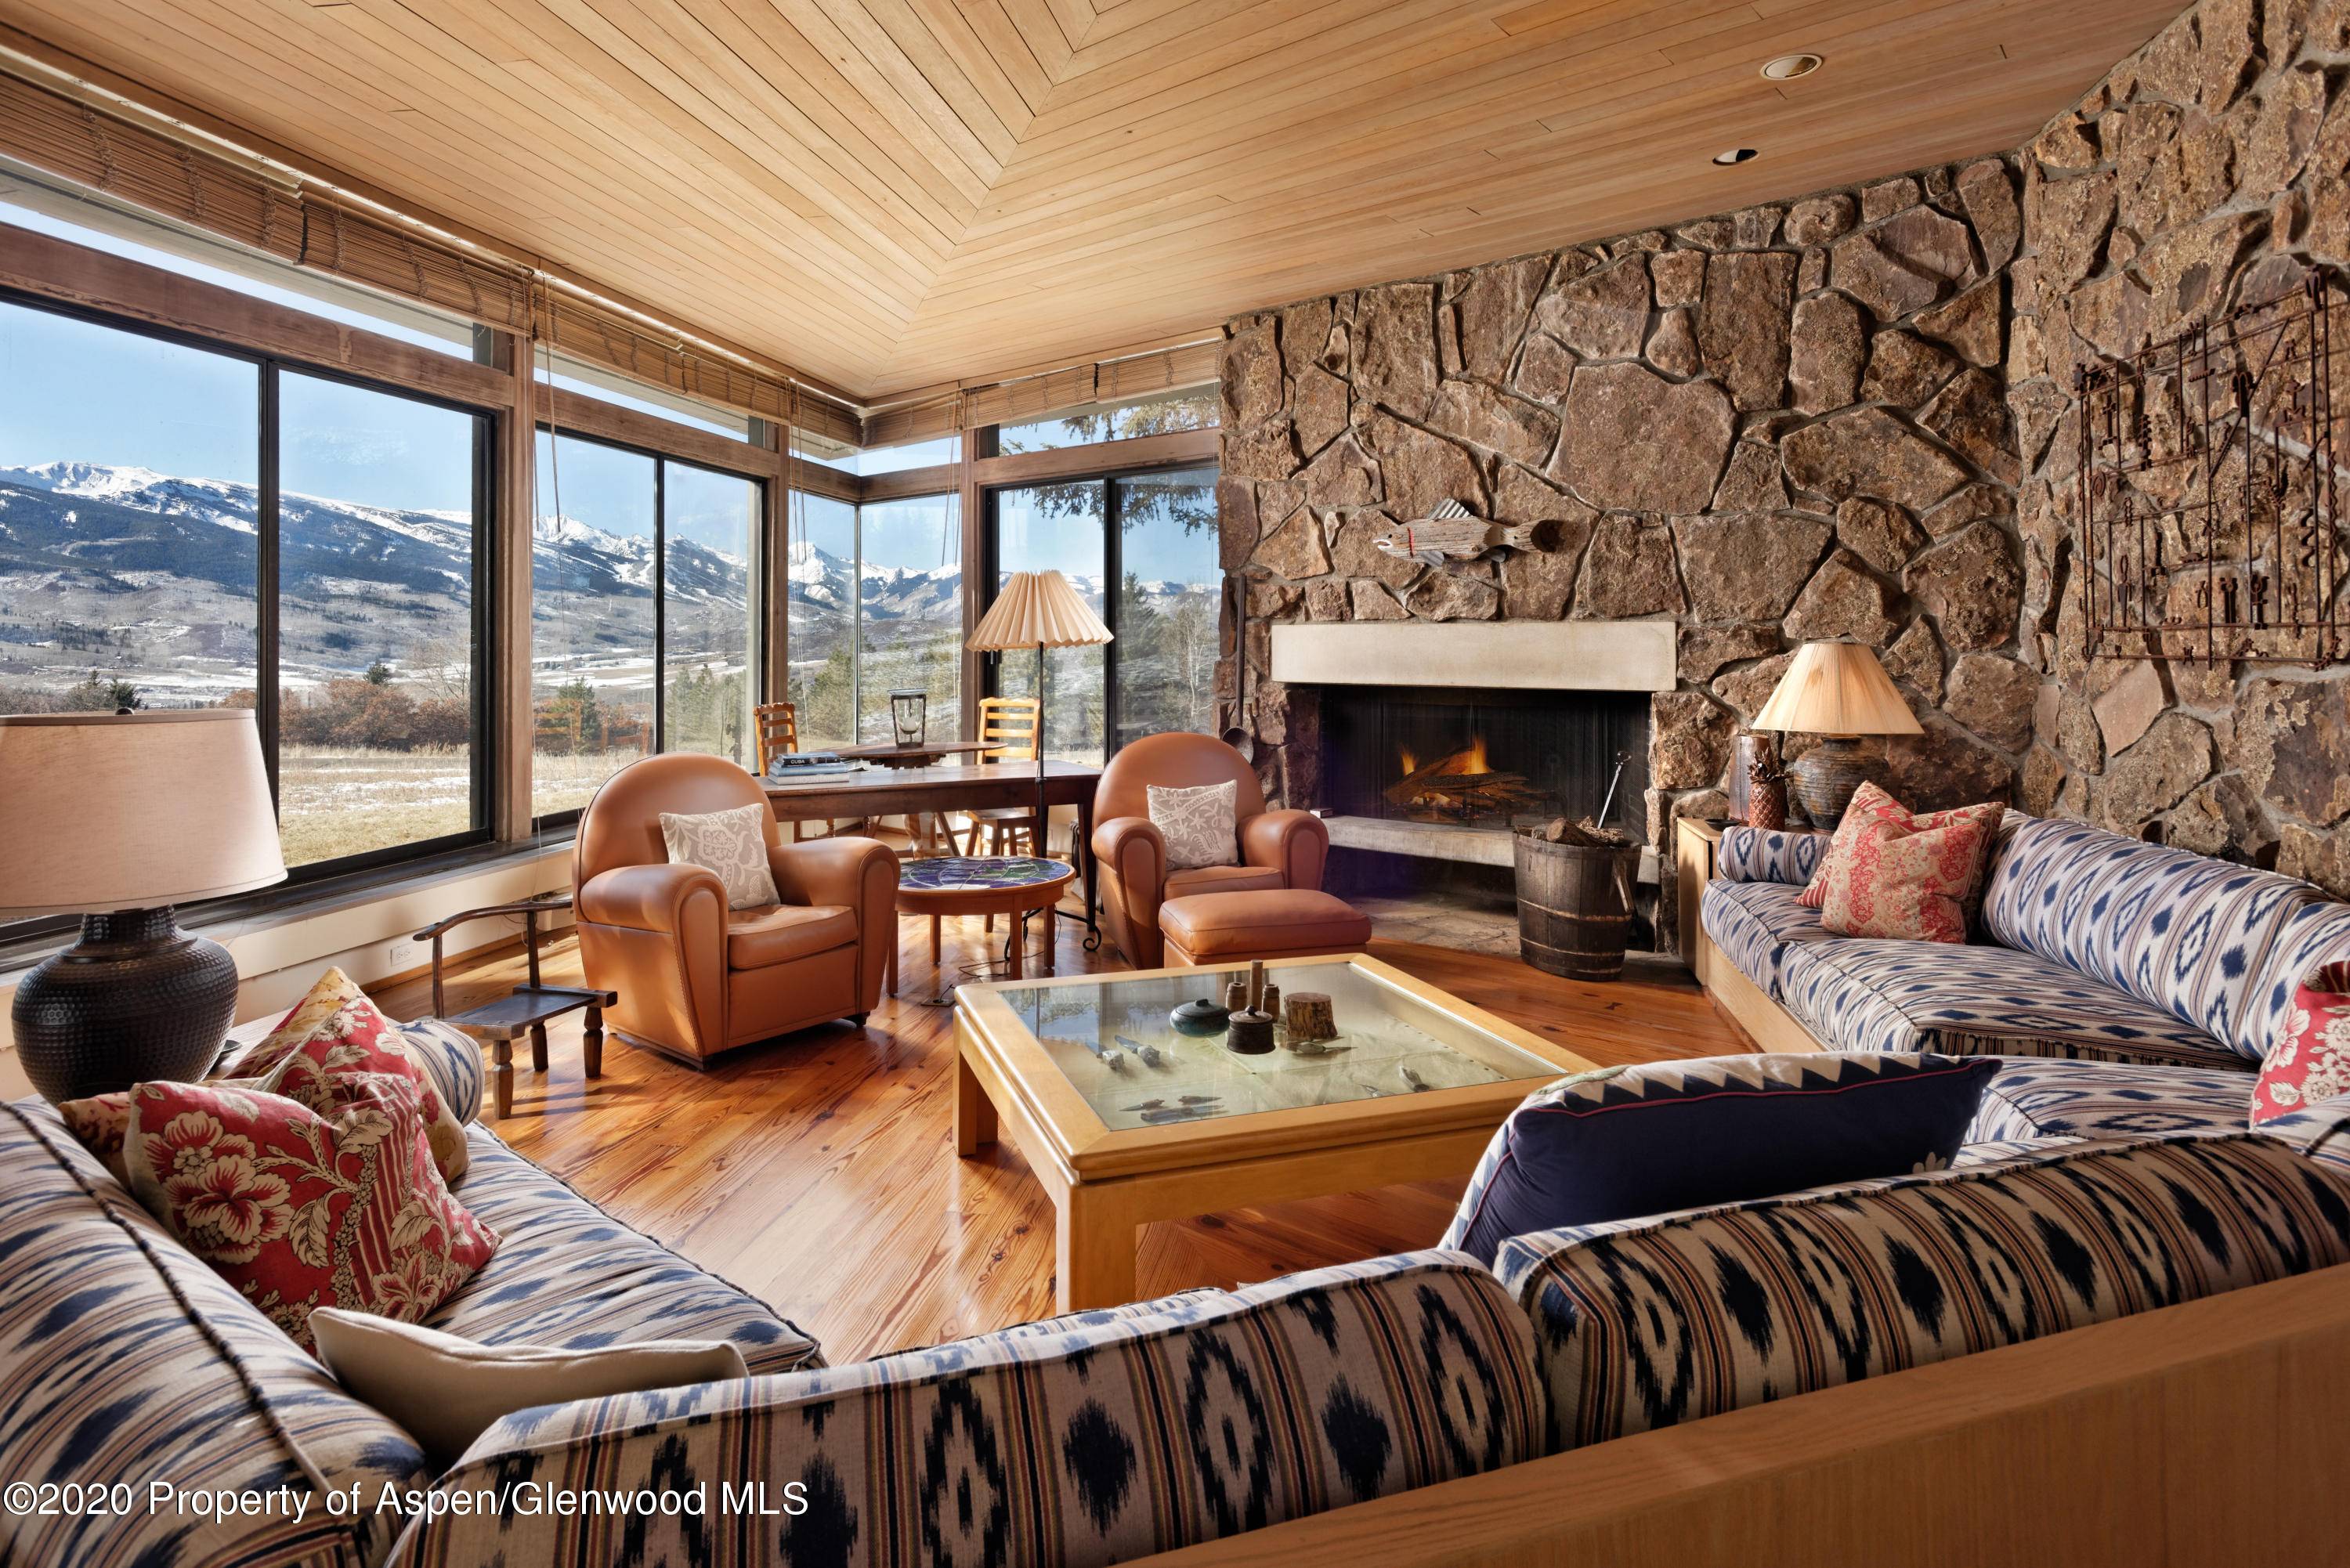 This 5 bedroom, 5 bathroom home in Starwood is the perfect mountain escape for your family.